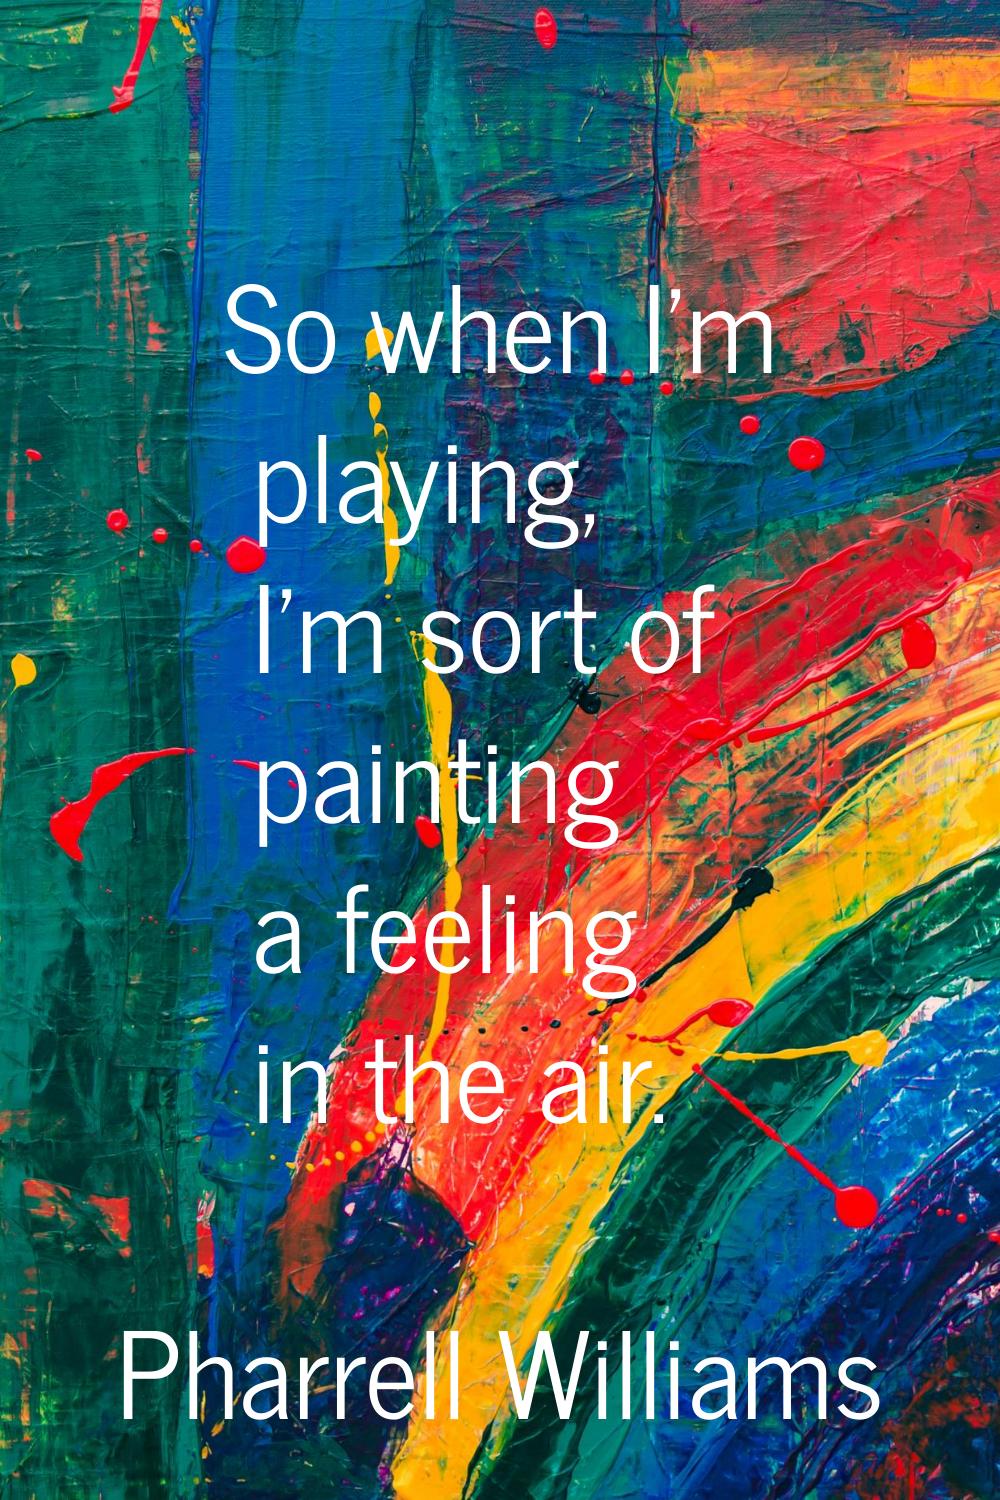 So when I'm playing, I'm sort of painting a feeling in the air.